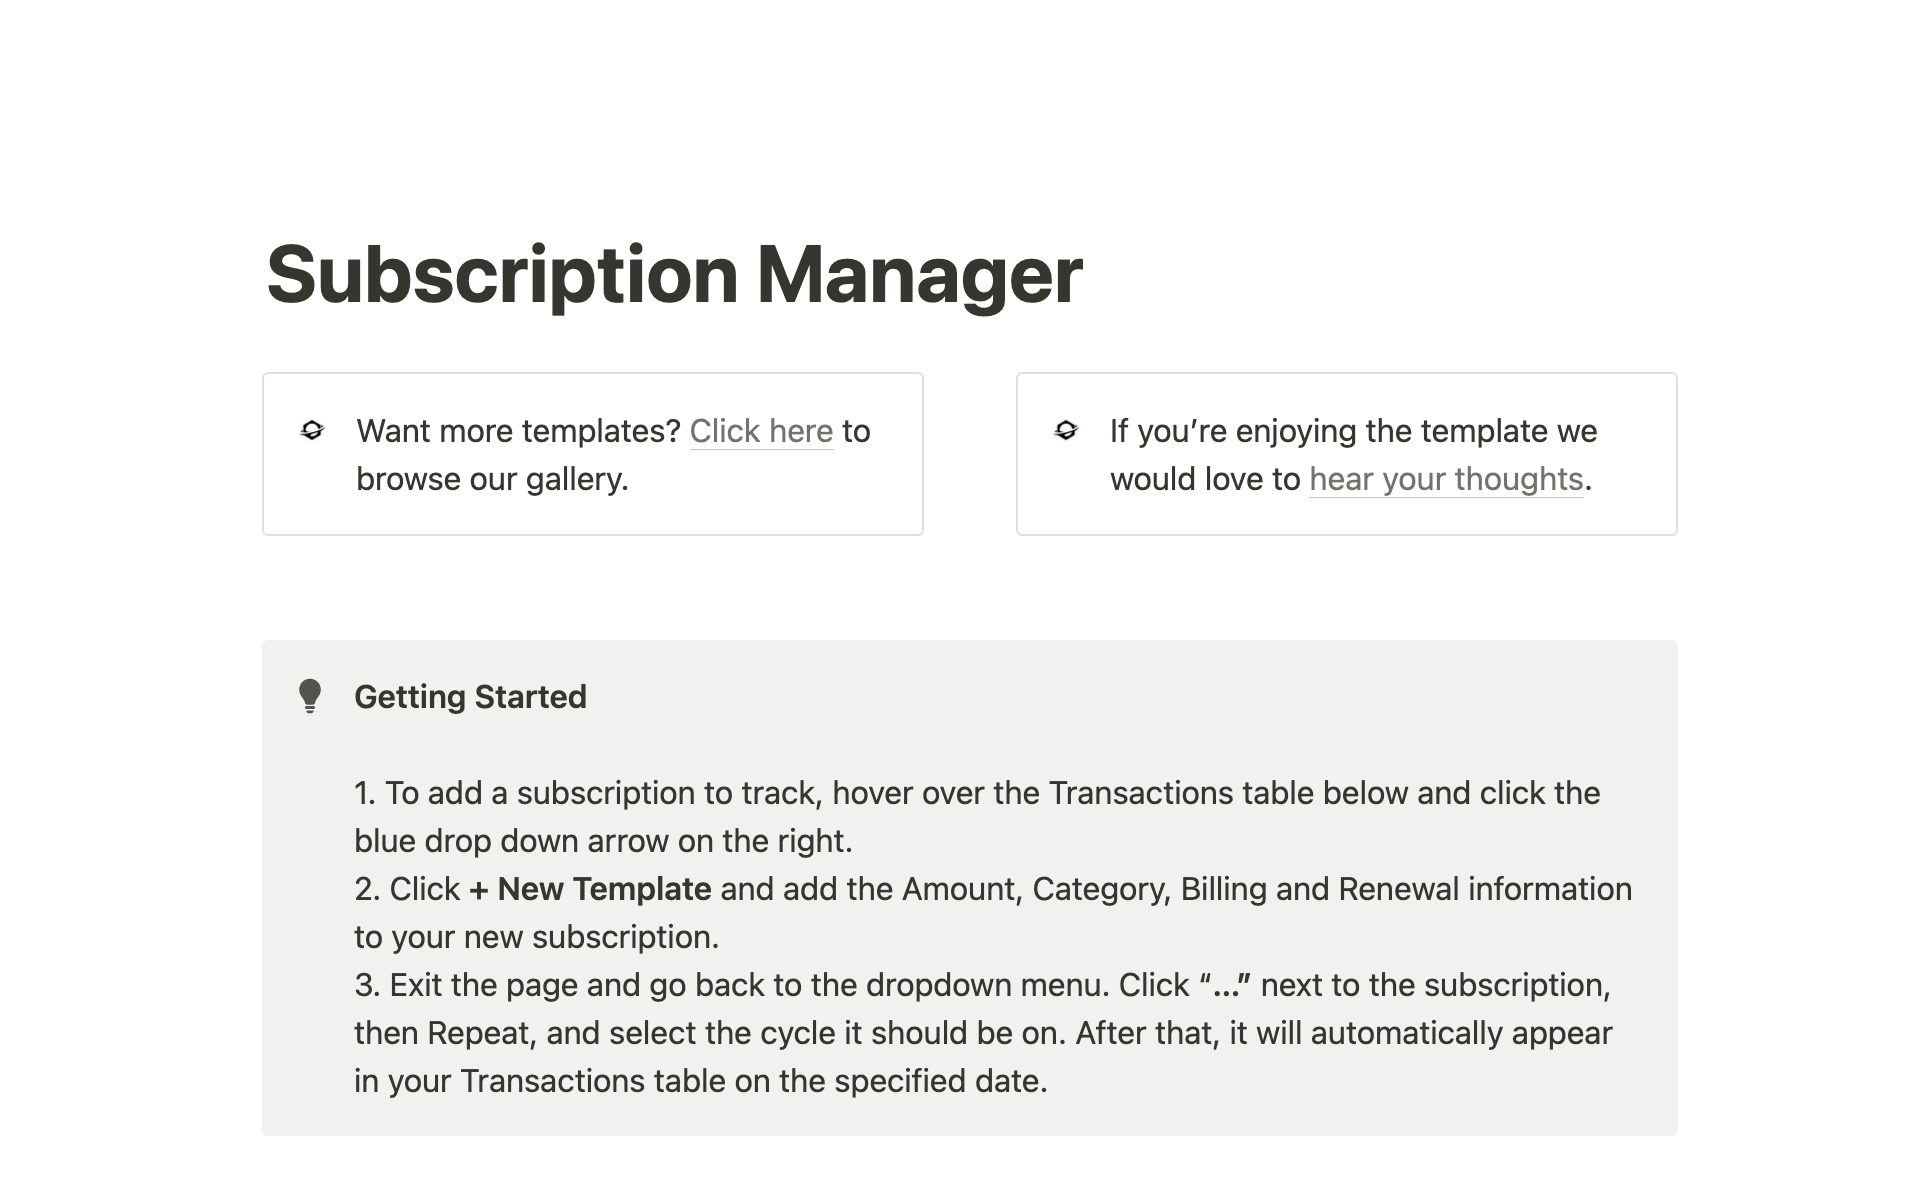 Track your subscriptions and monitor spending.